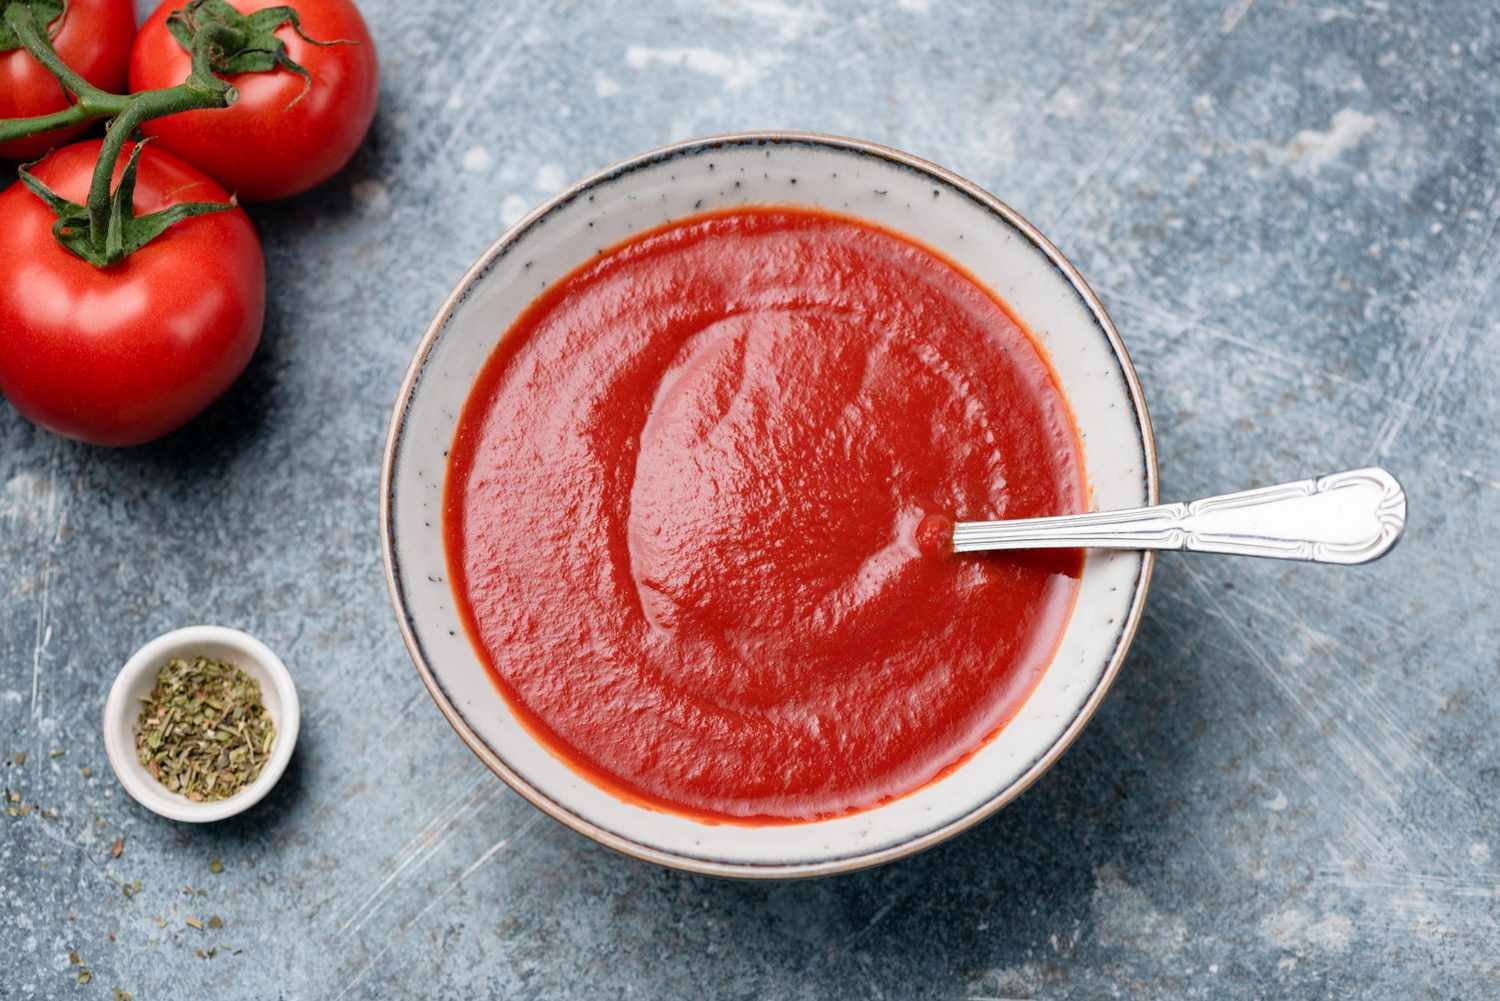 How to Make Tomato Purée At Home